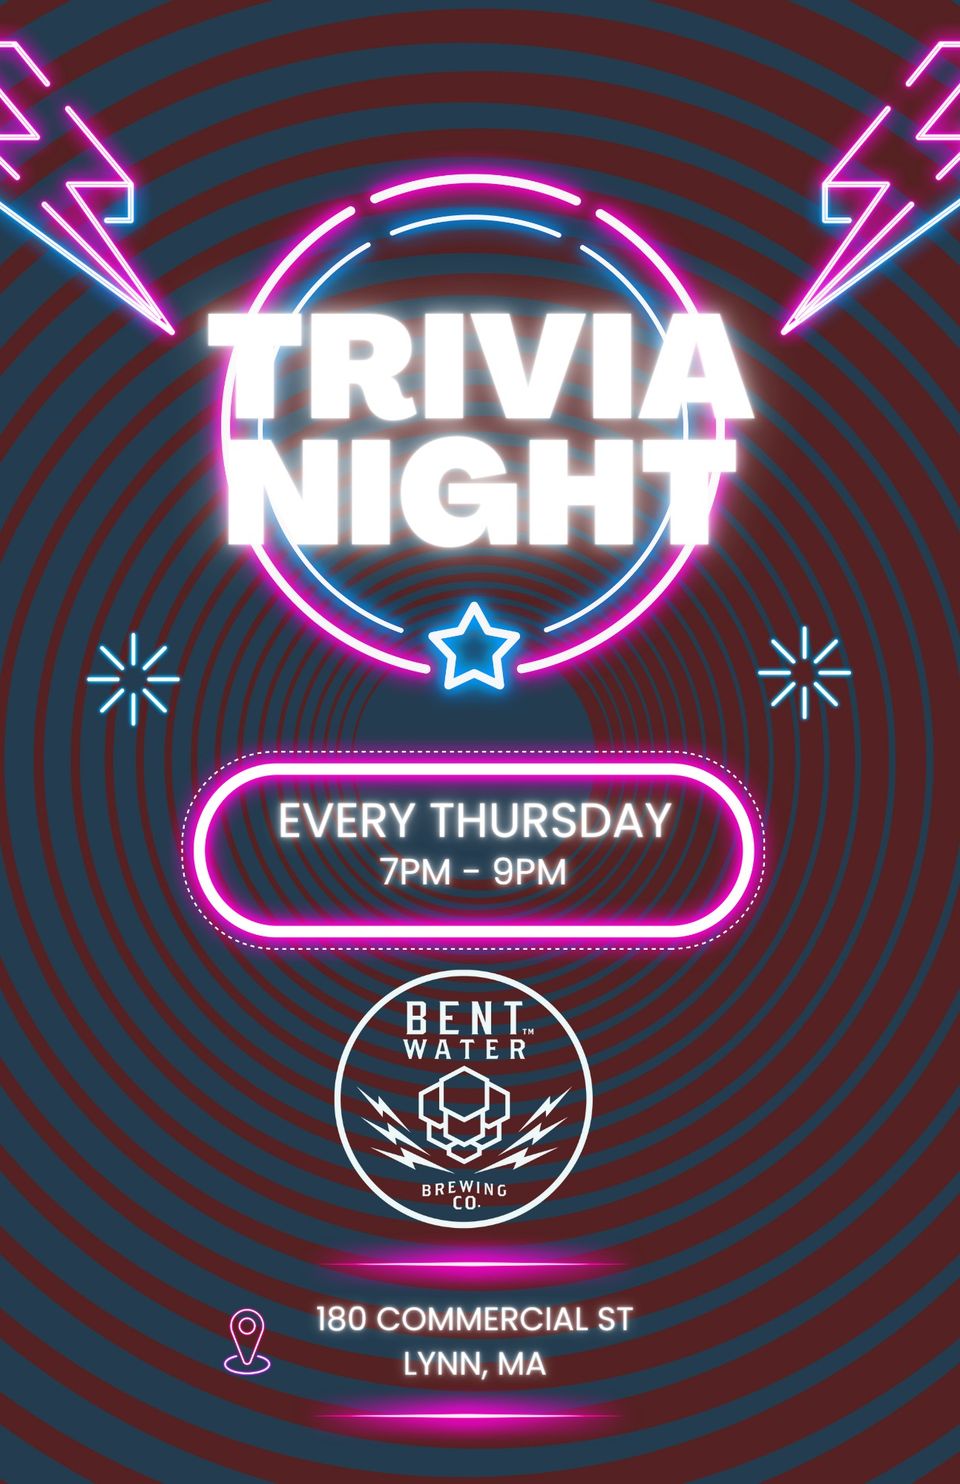 Get ready for Trivia Night every Thursday at Bent Water Brewing Co. Spot our poster with its vibrant neon lights and striking fonts against a mesmerizing dark swirl backdrop. Don't miss the fun!